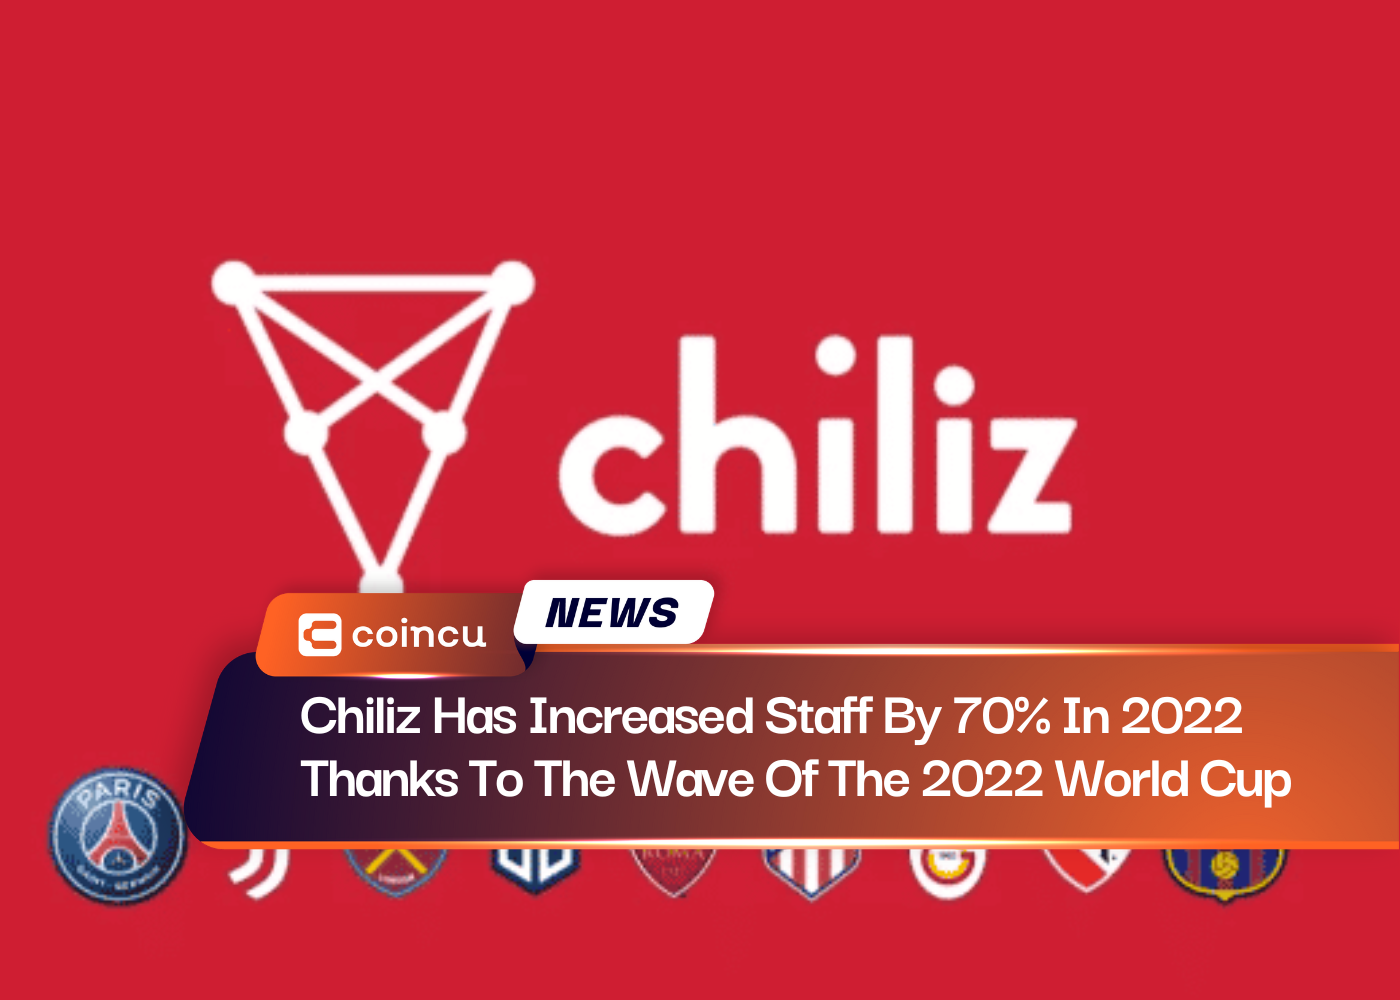 Chiliz Has Increased Staff By 70% In 2022 Thanks To The Wave Of The 2022 World Cup